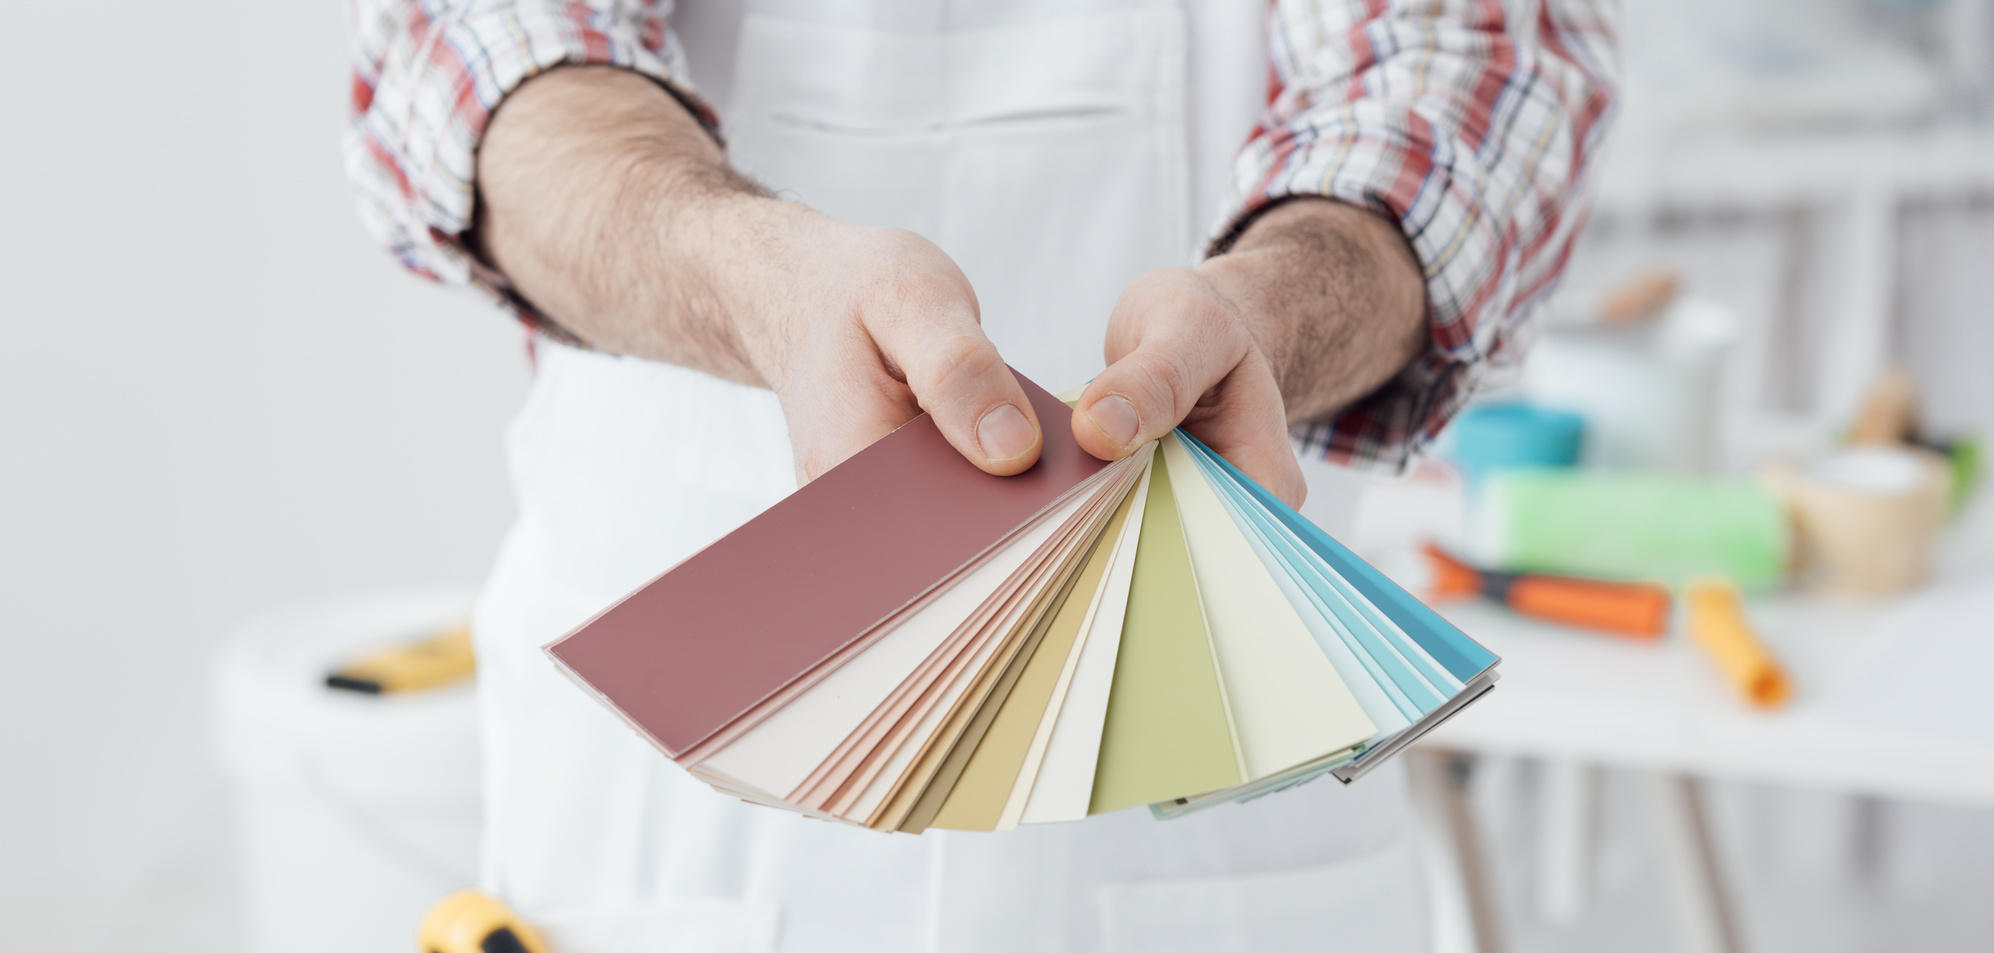 Why You Should Consider DIY Interior Painting This Fall